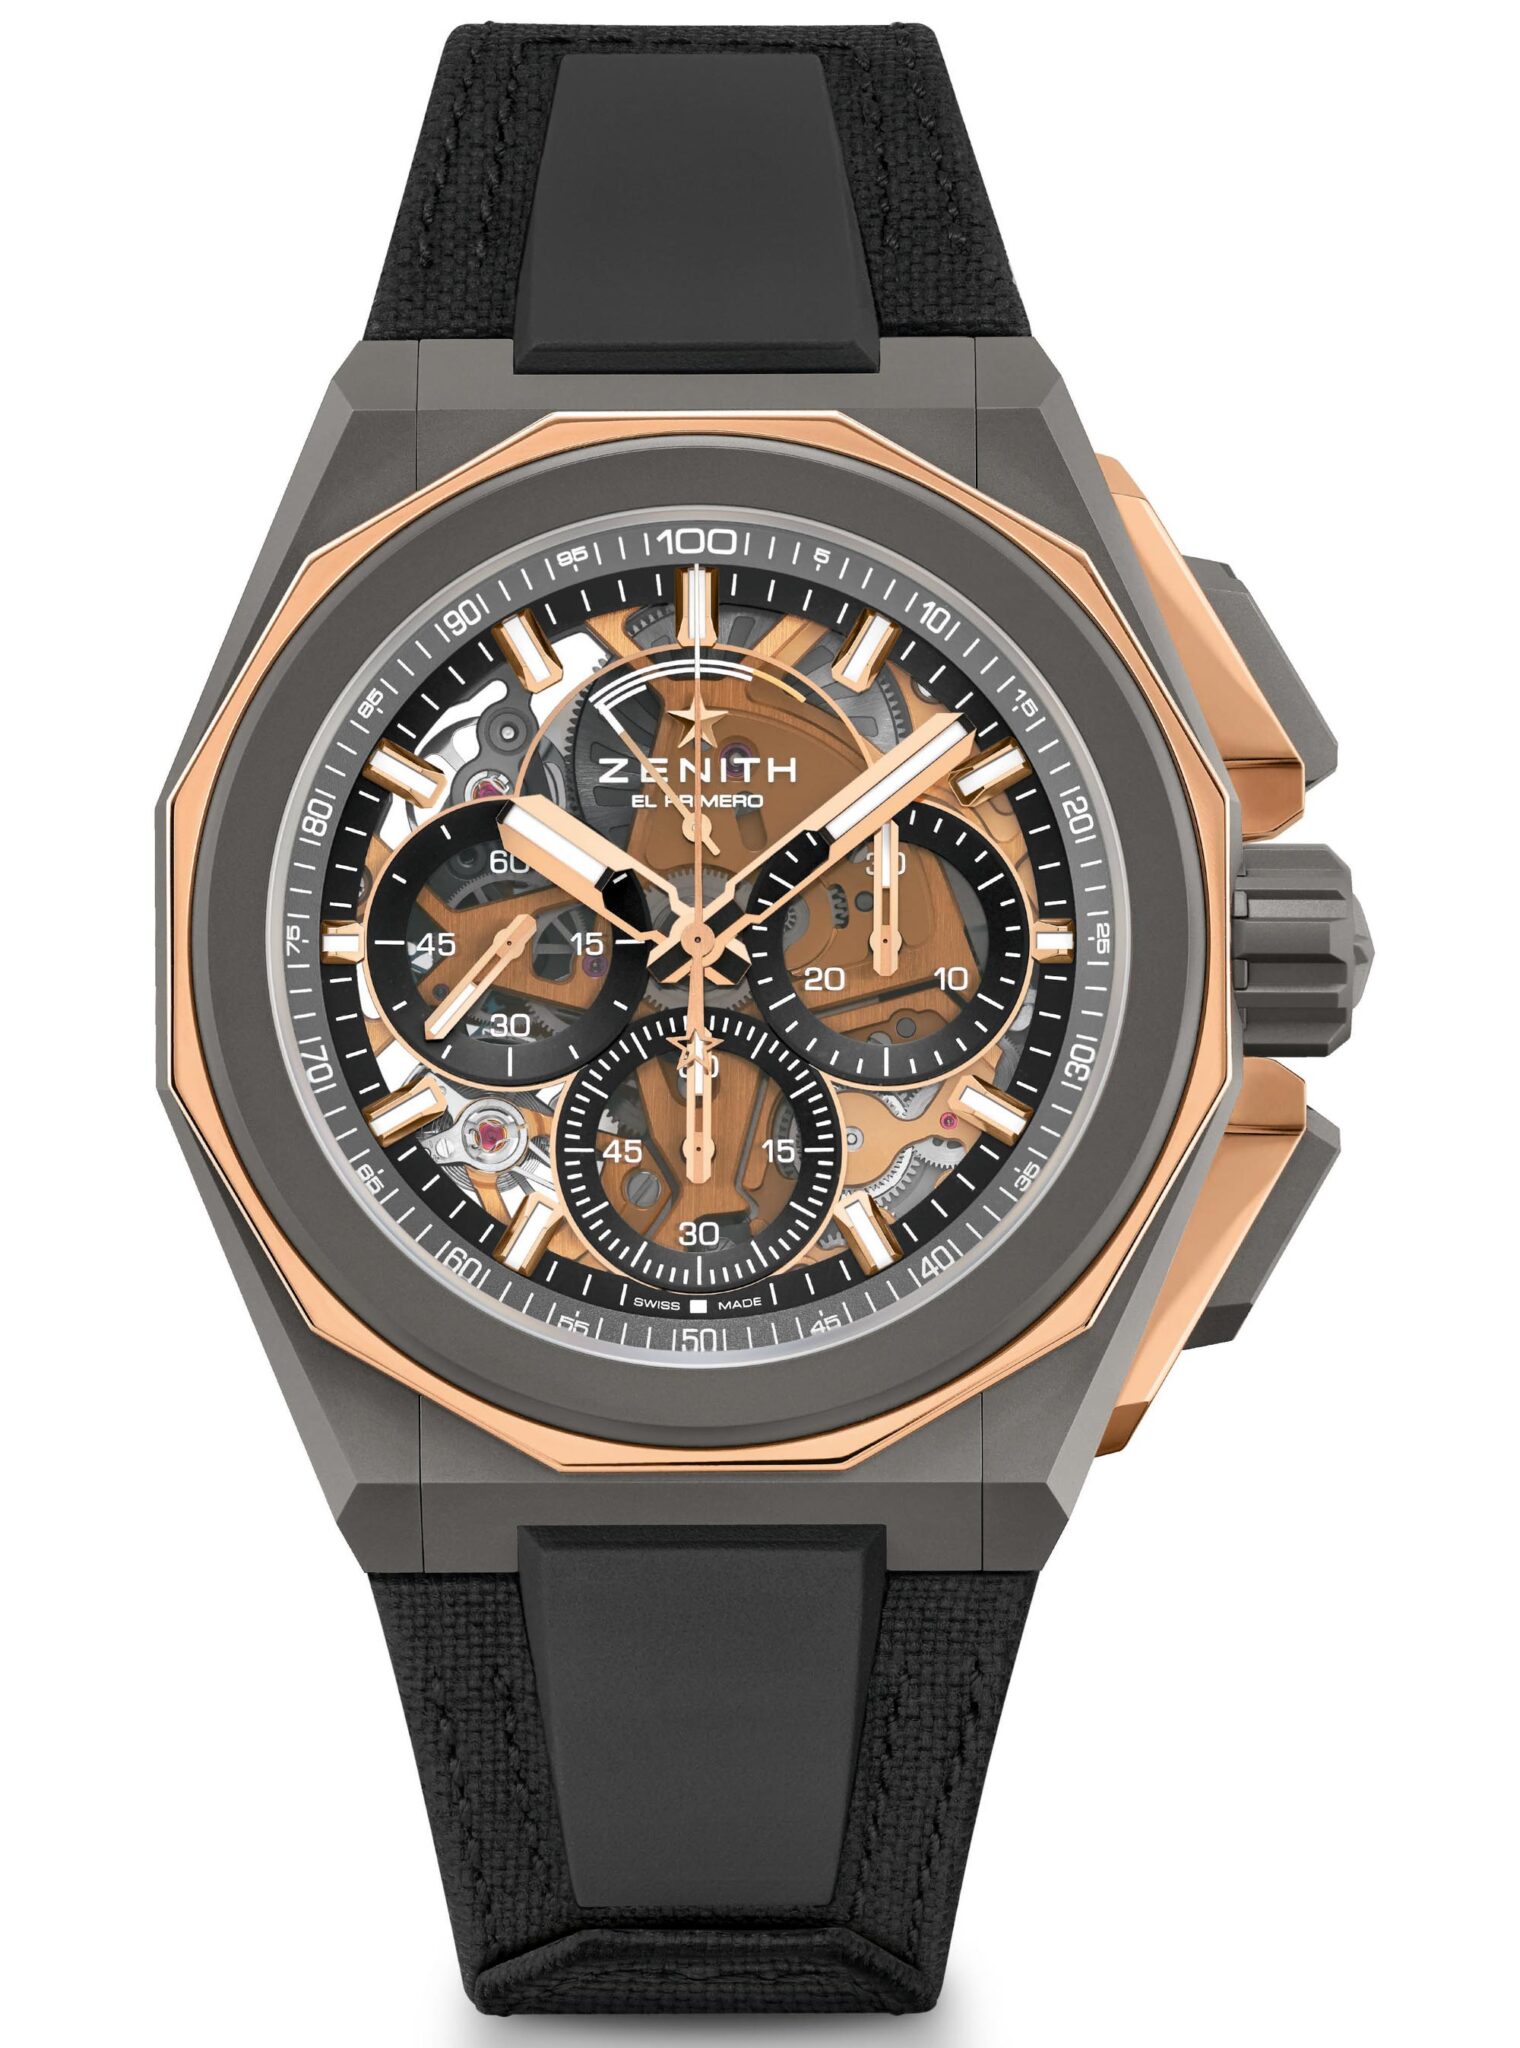 The Zenith Defy Extreme Watch Collection For 2021 With 1/100th ...